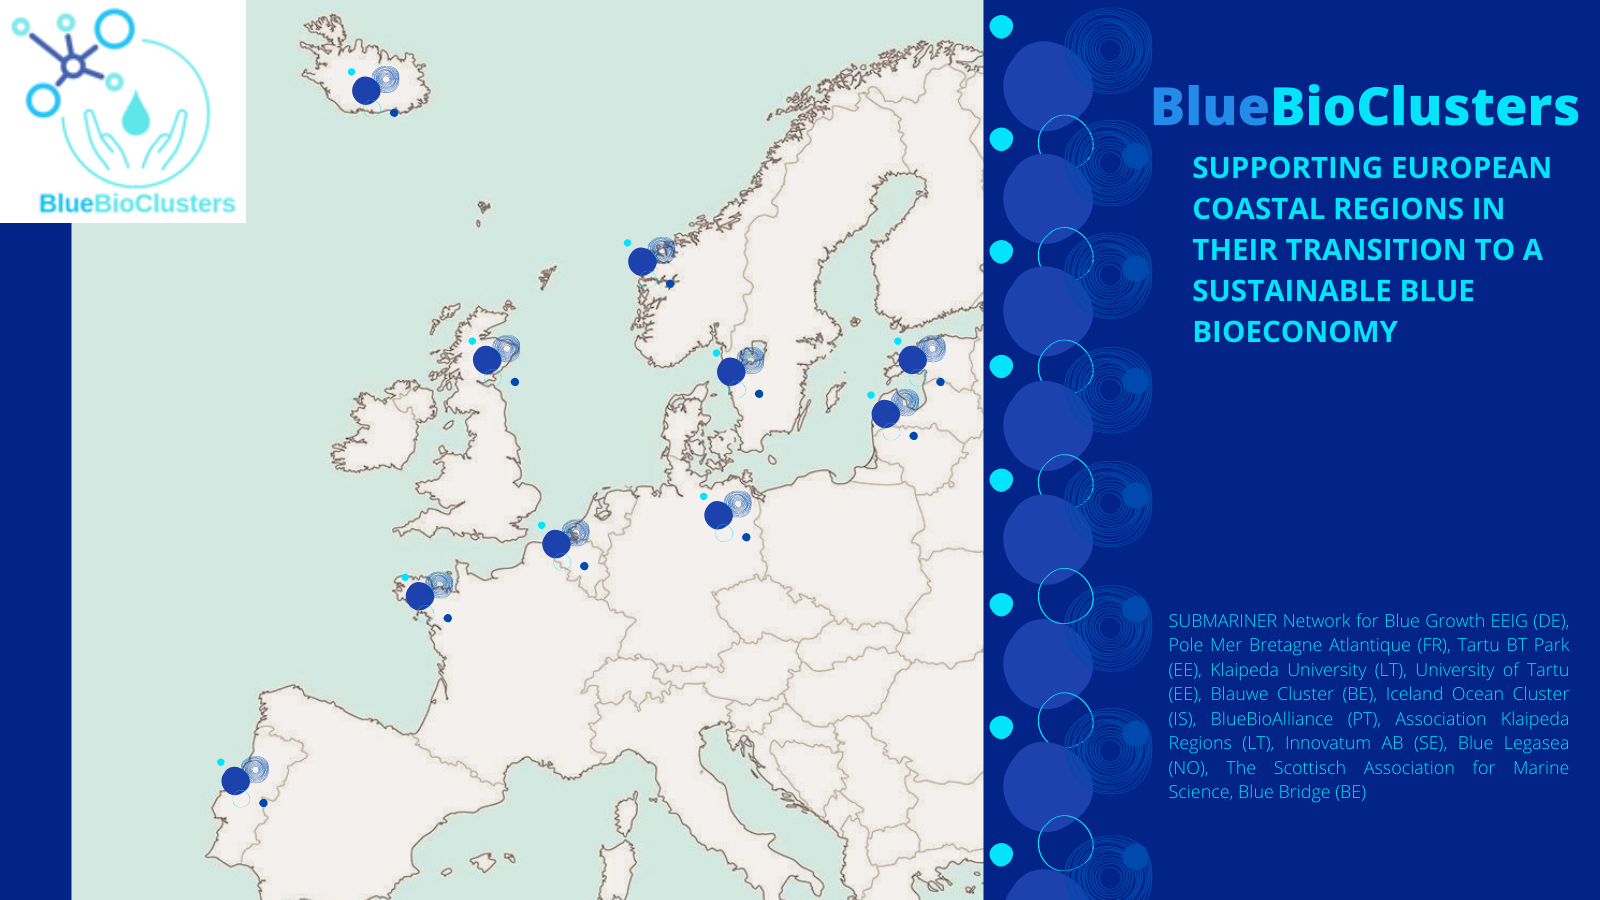 New SUBMARINER project 'BlueBioClusters' to start in August 2022